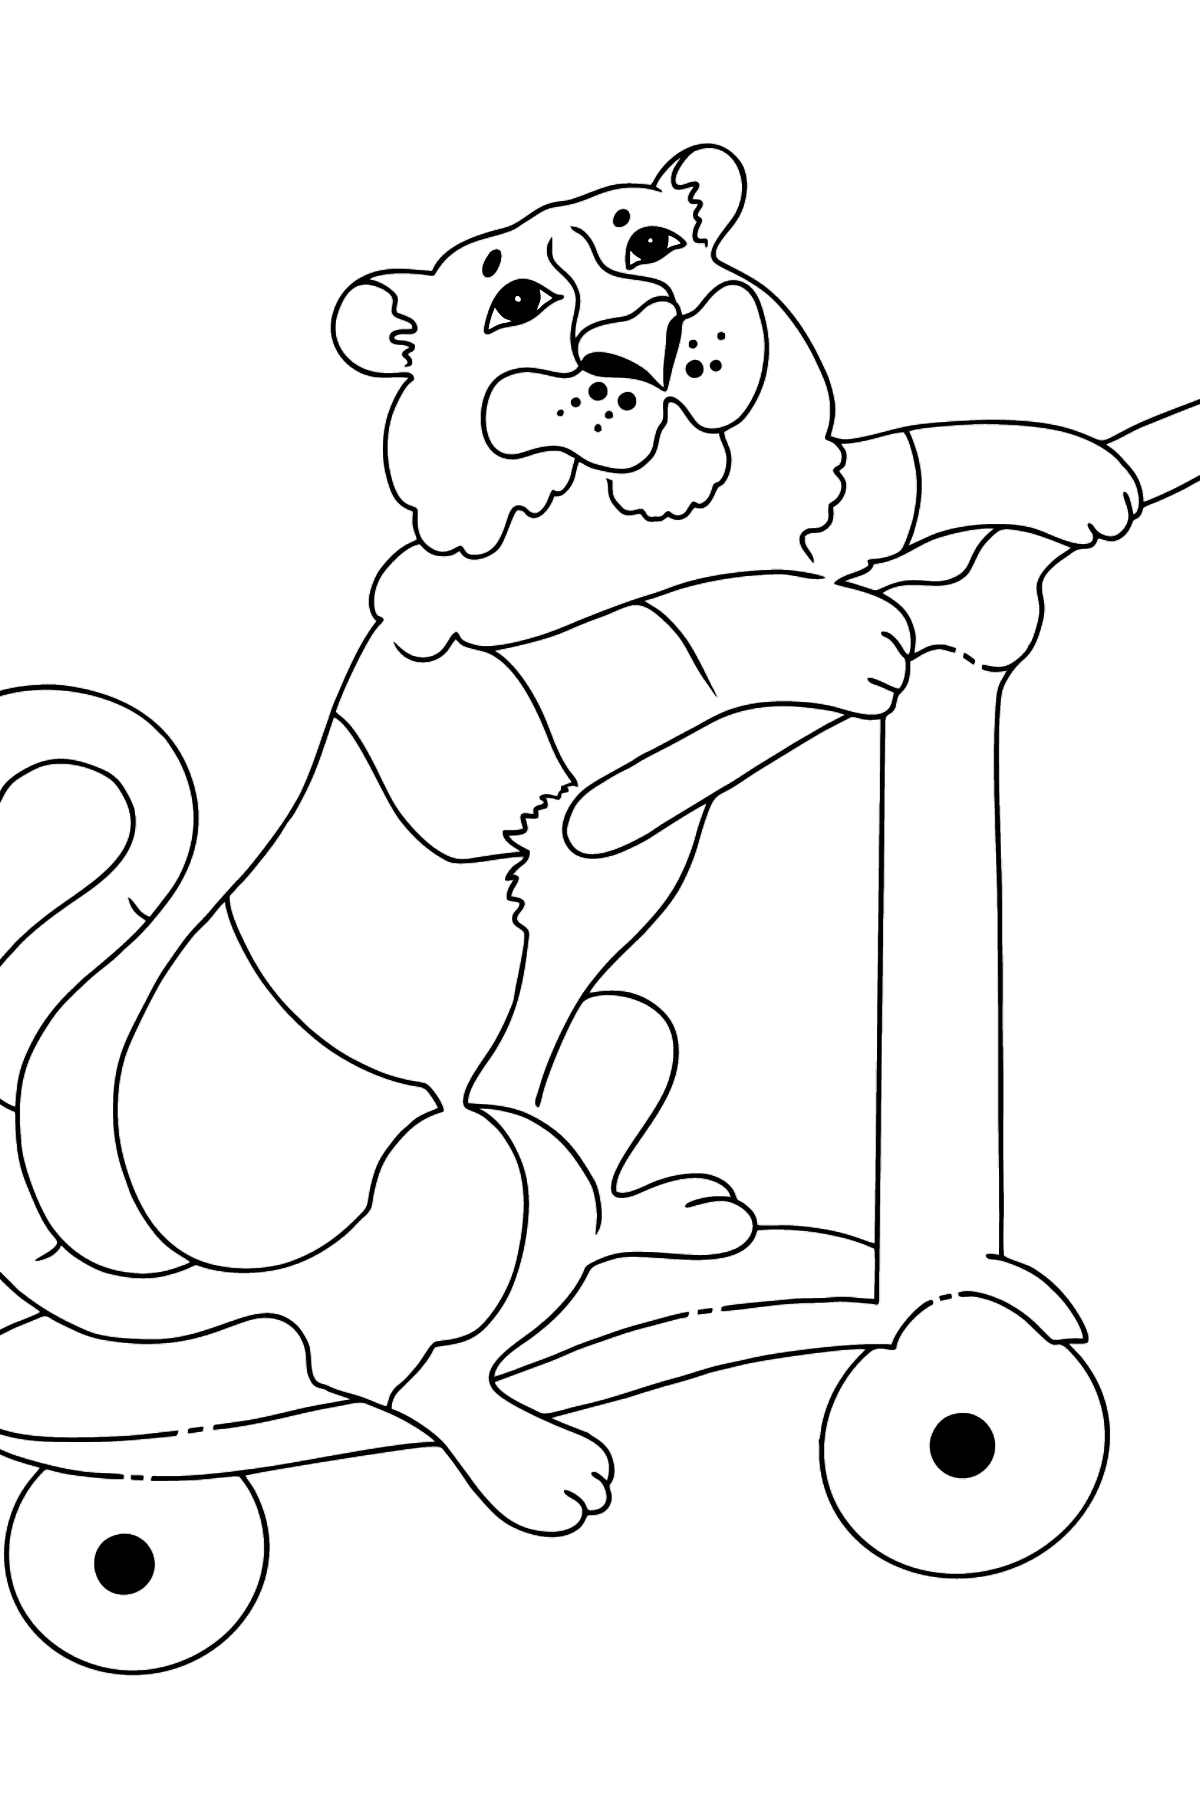 Coloring Page - A Tiger on a Scooter - Coloring Pages for Kids